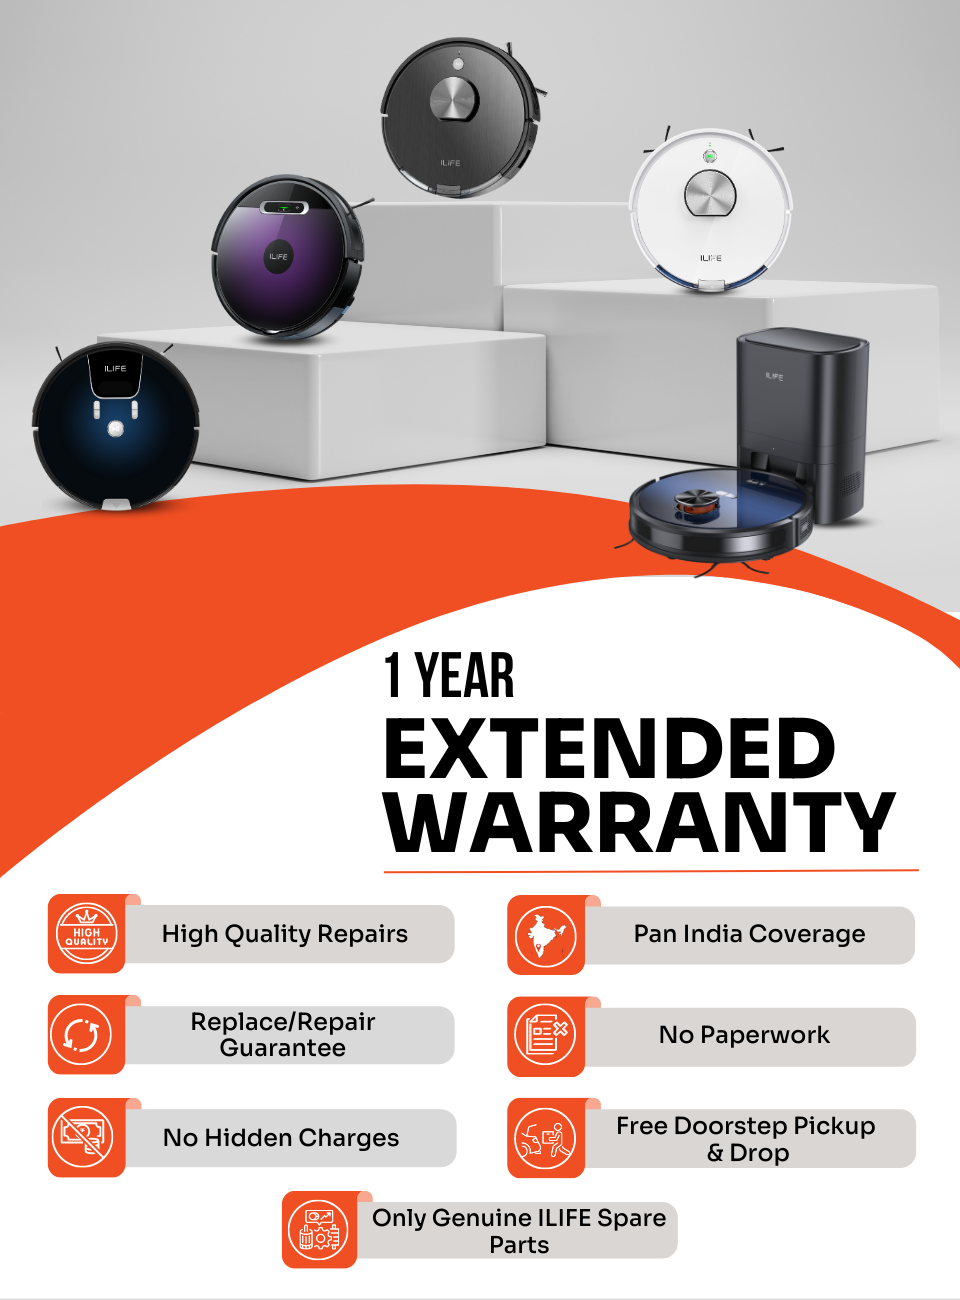 ILIFE 1 year extended warranty image 1